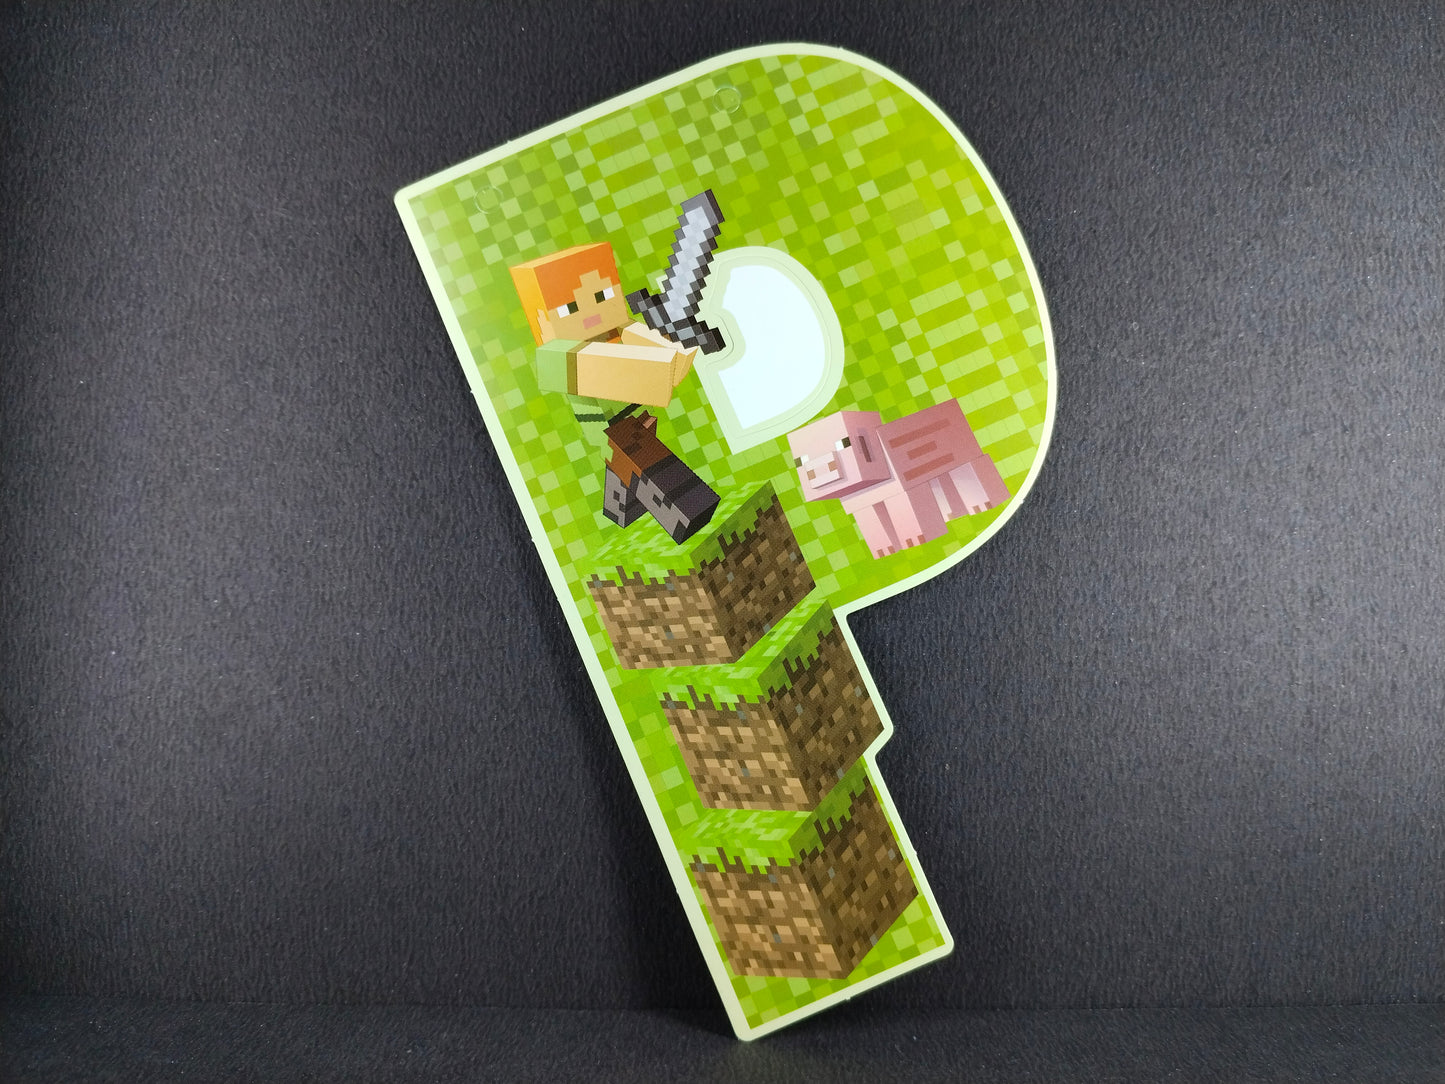 Birthday Banner - Mine Craft Theme for Simple birthday decorations at Home